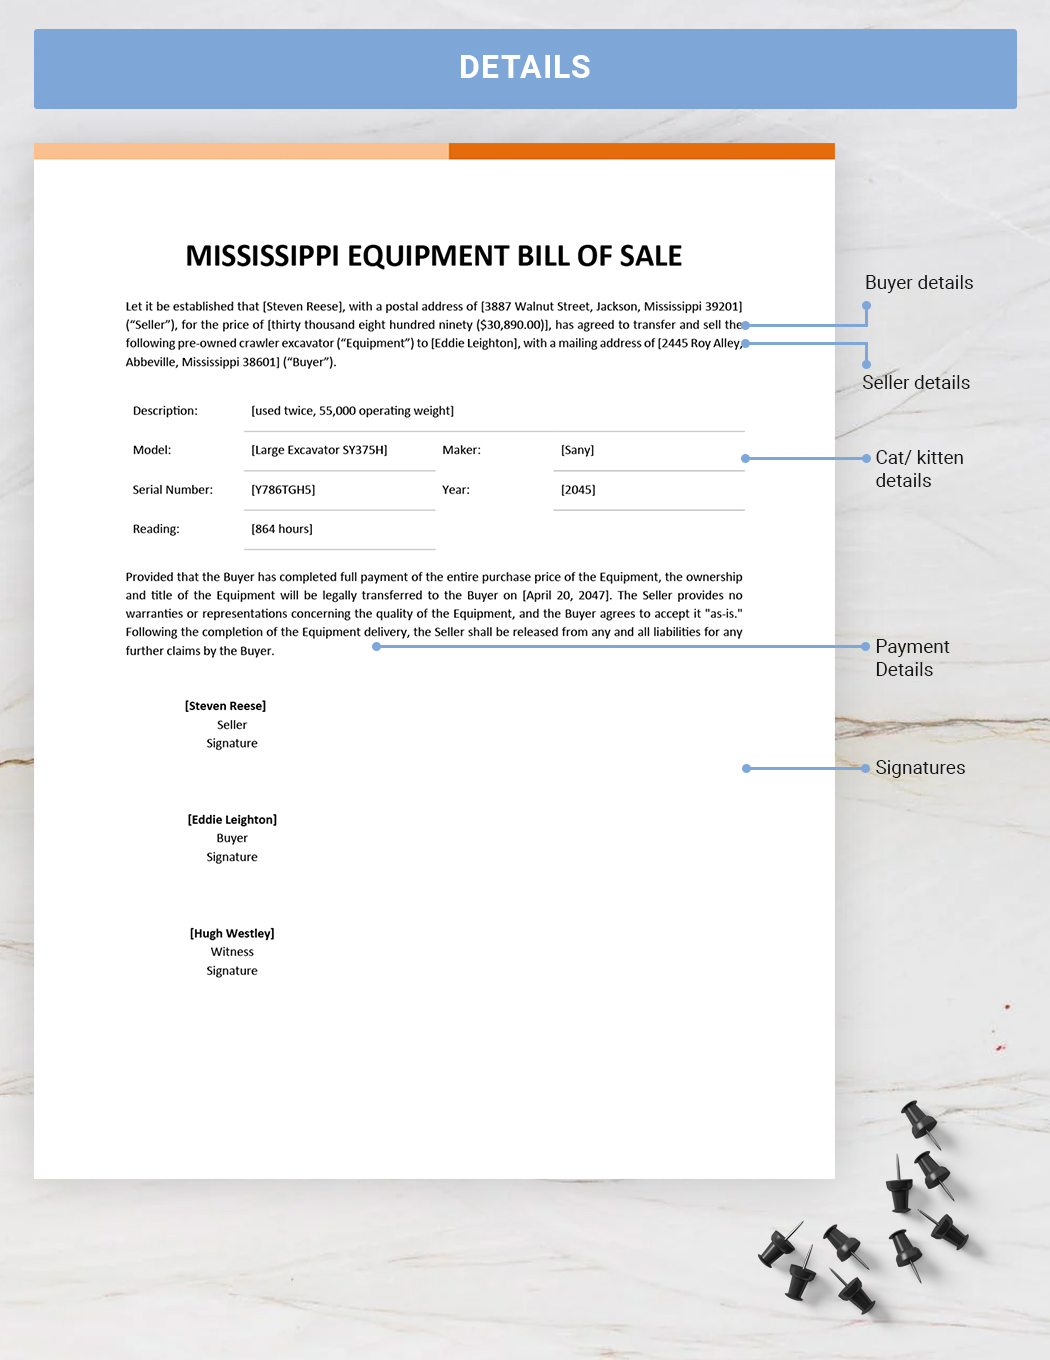 Mississippi Equipment Bill of Sale Template